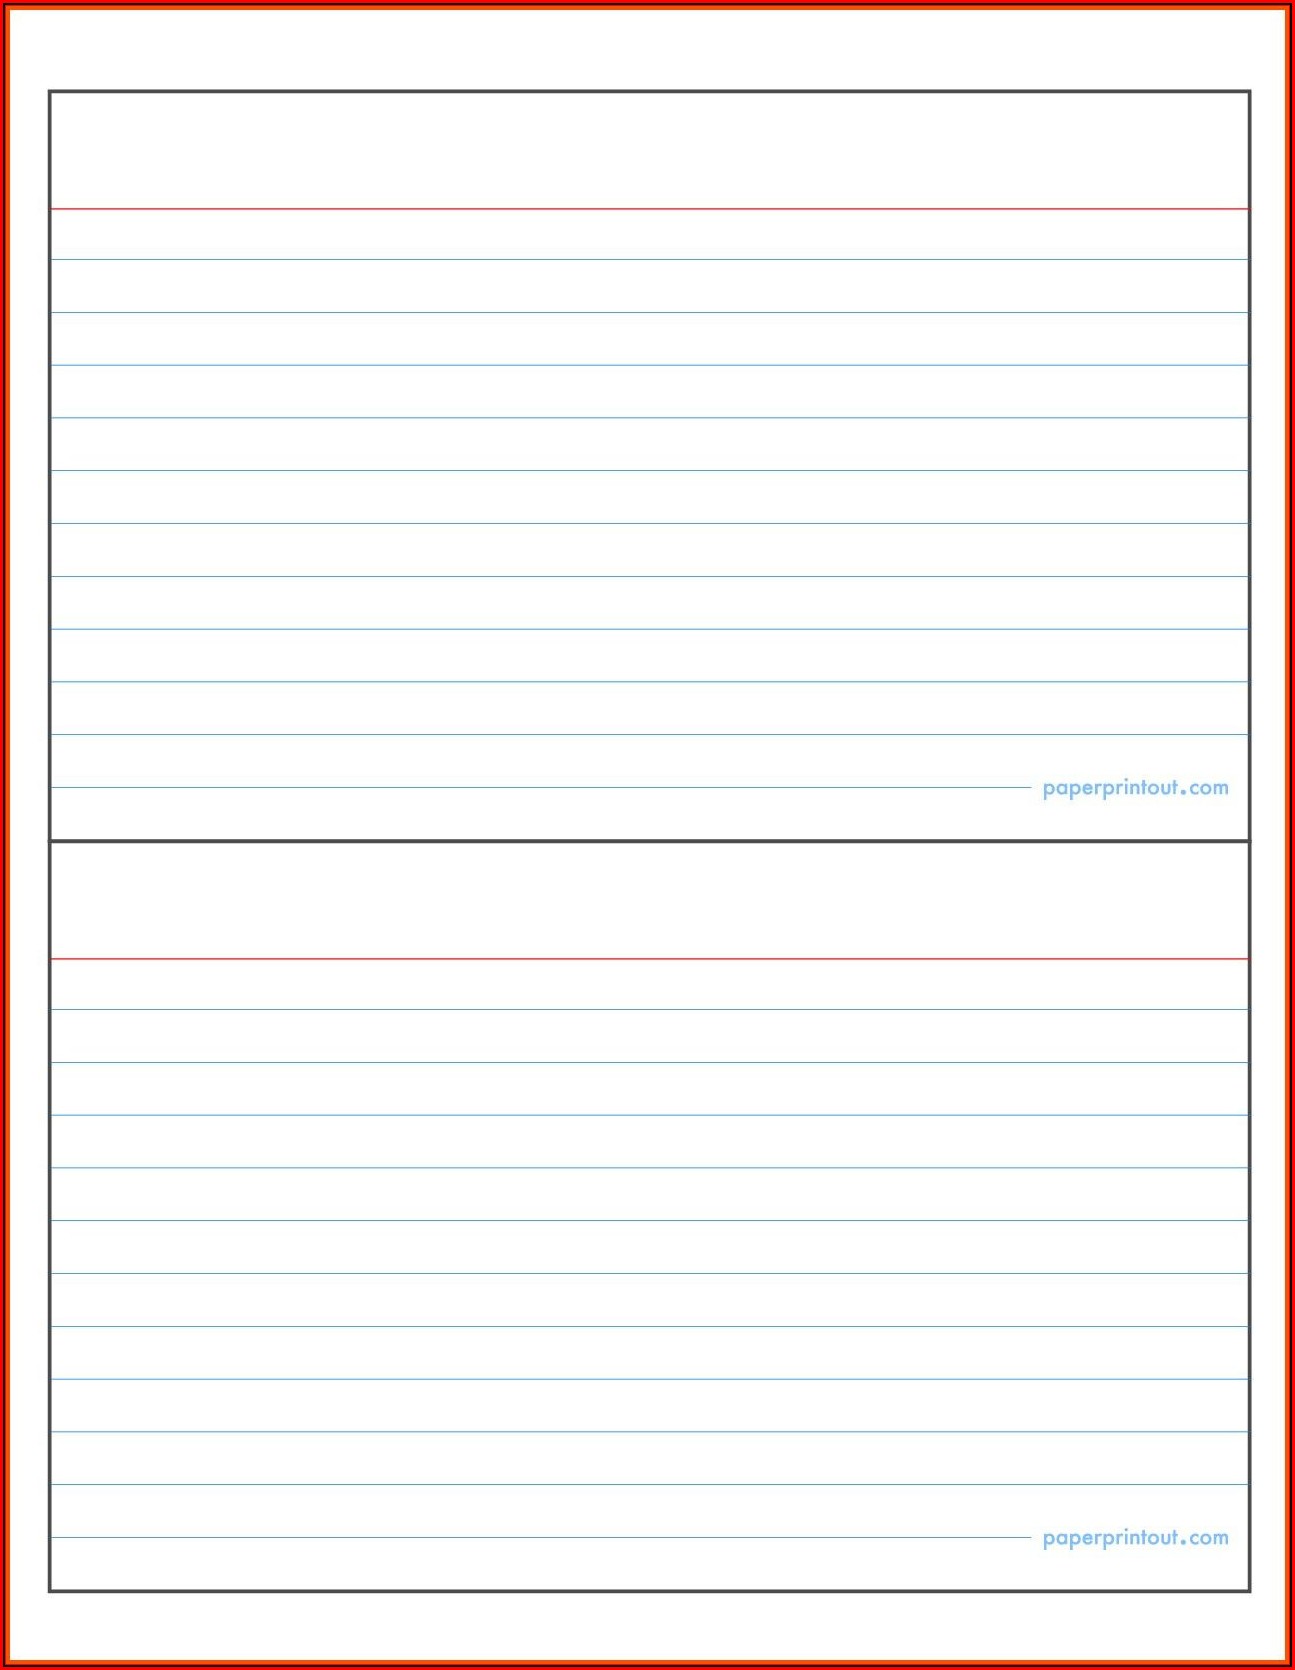 4x6 Index Card Template For Pages